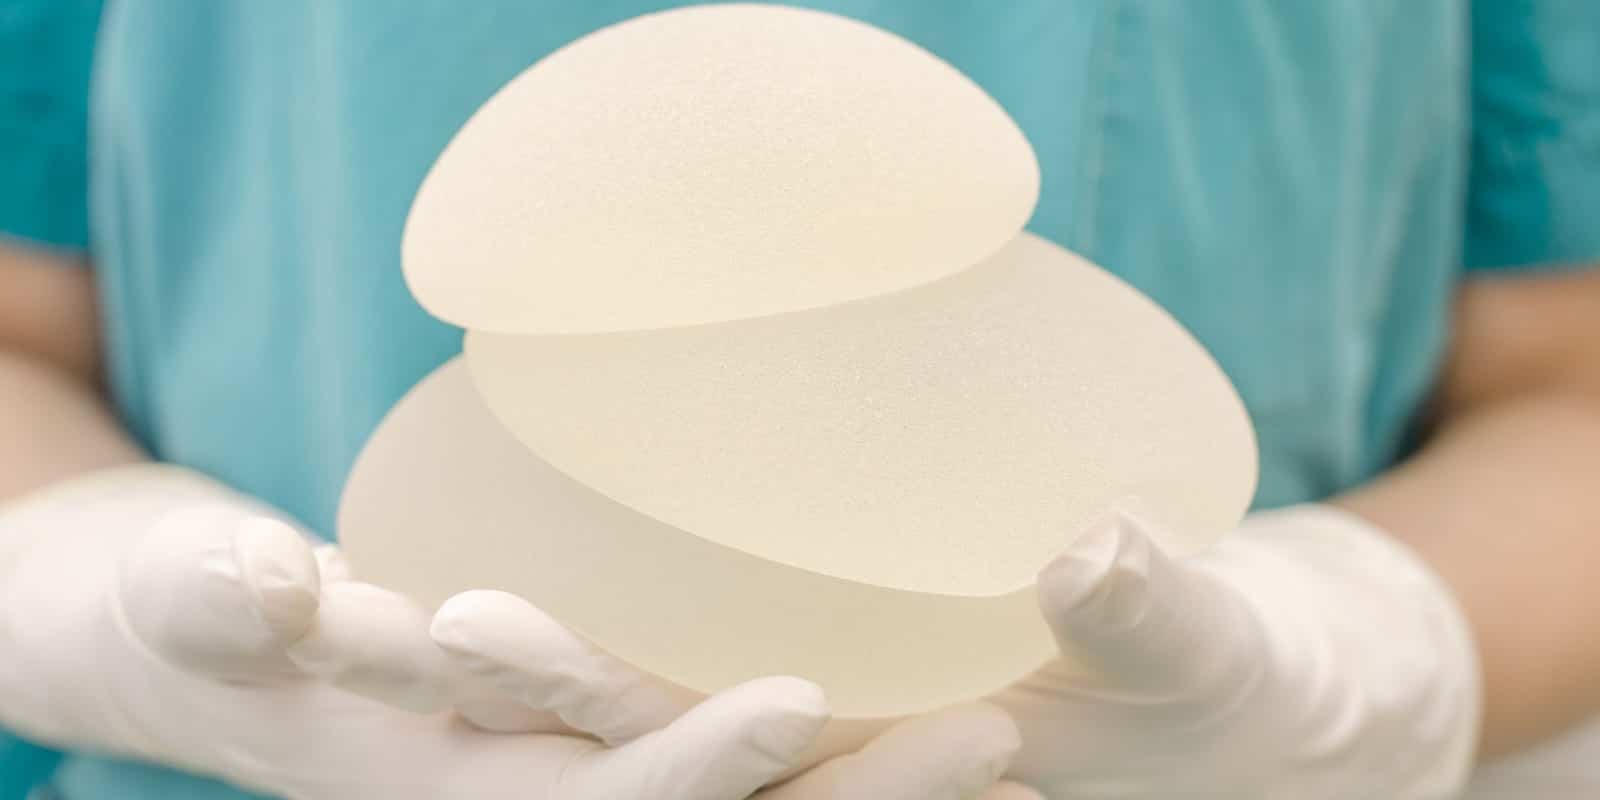 Breast implant Style, Texture, Profile and Sizing